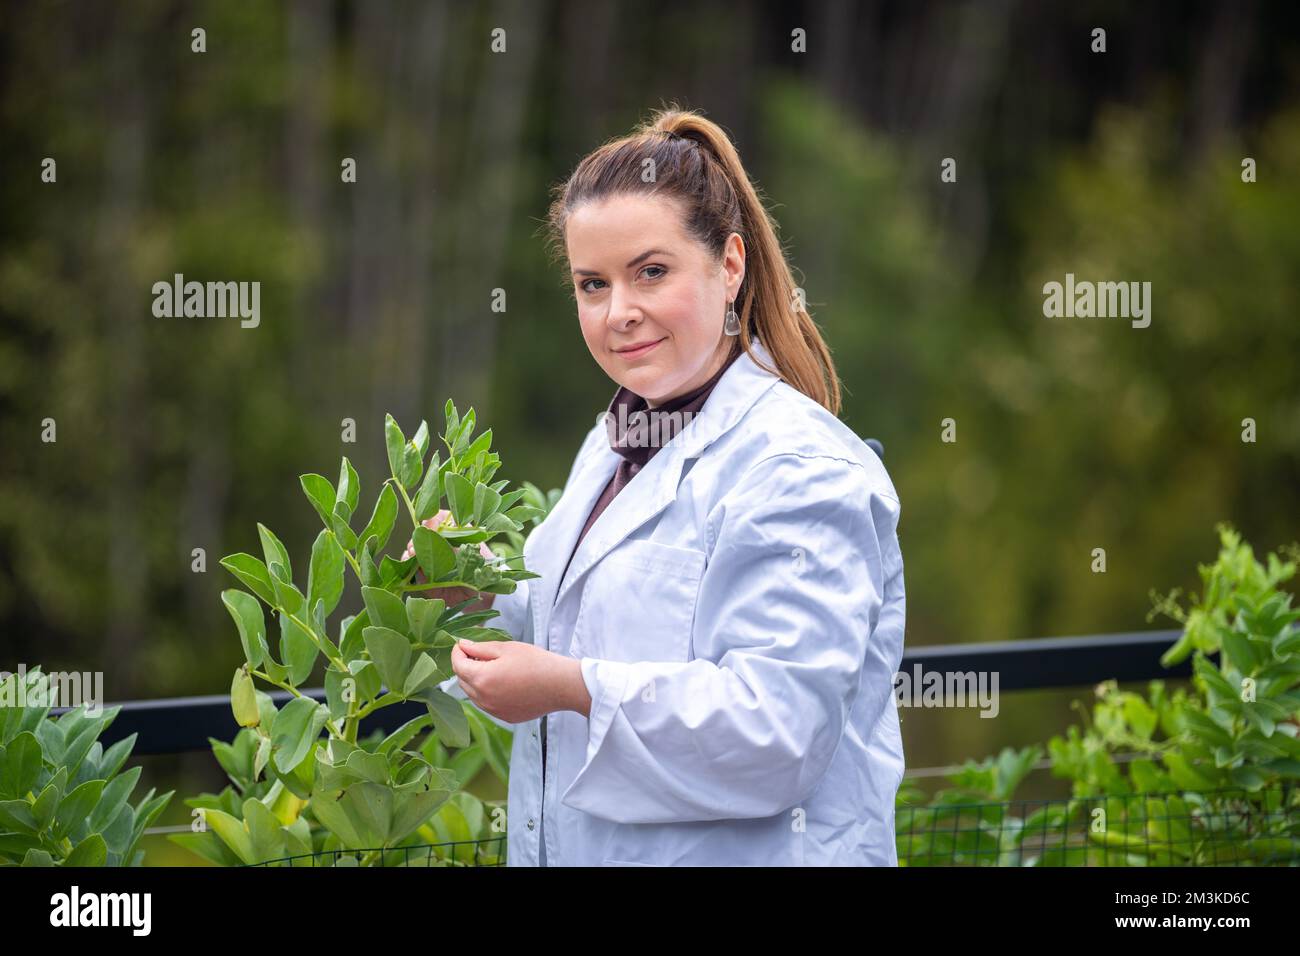 female scientist student in a university. studying plant science doing experiments in america Stock Photo